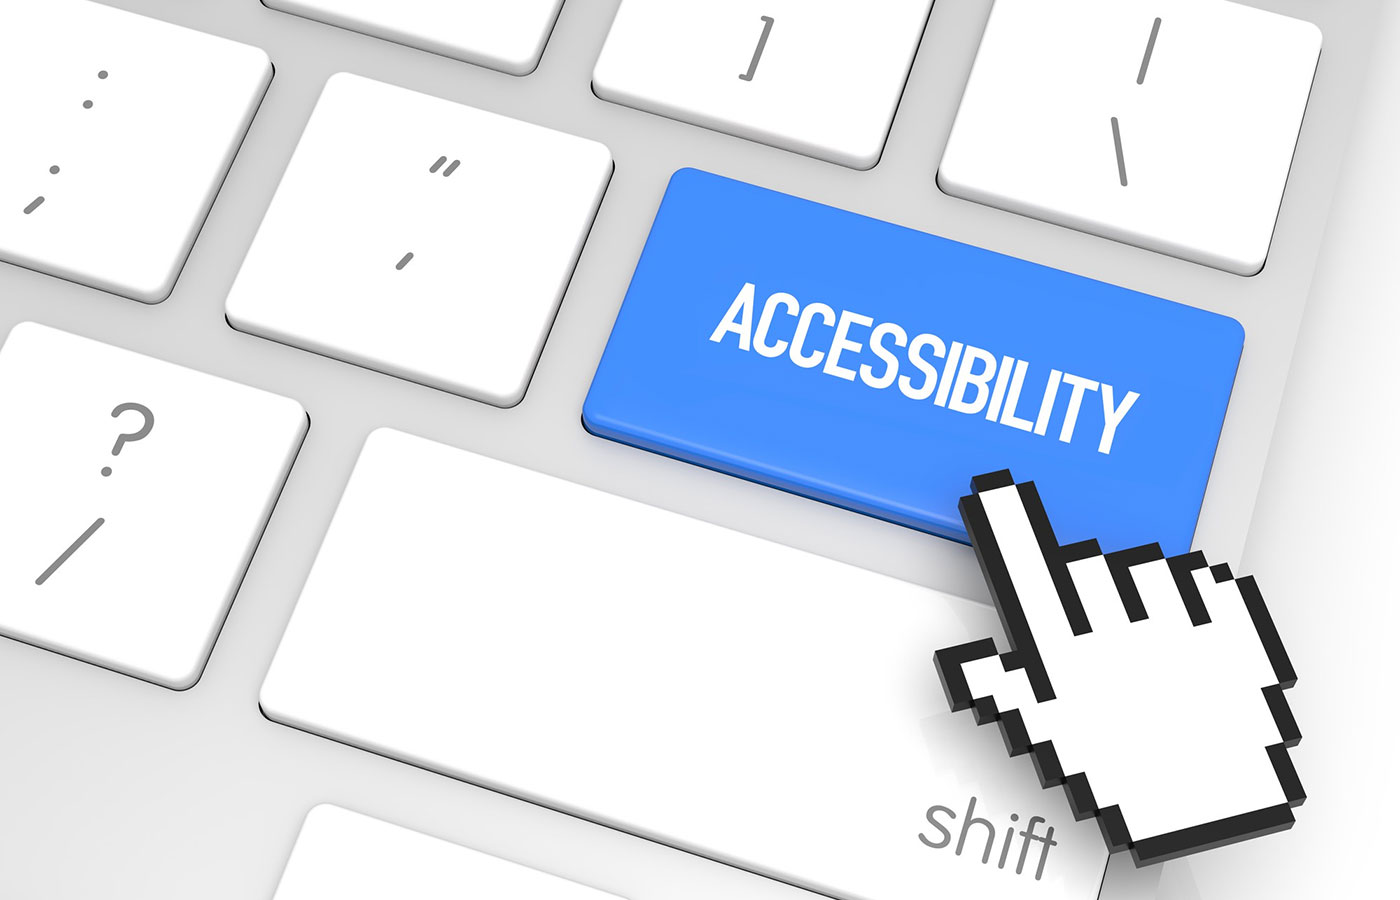 keyboard shortcuts for windows accessibility tools